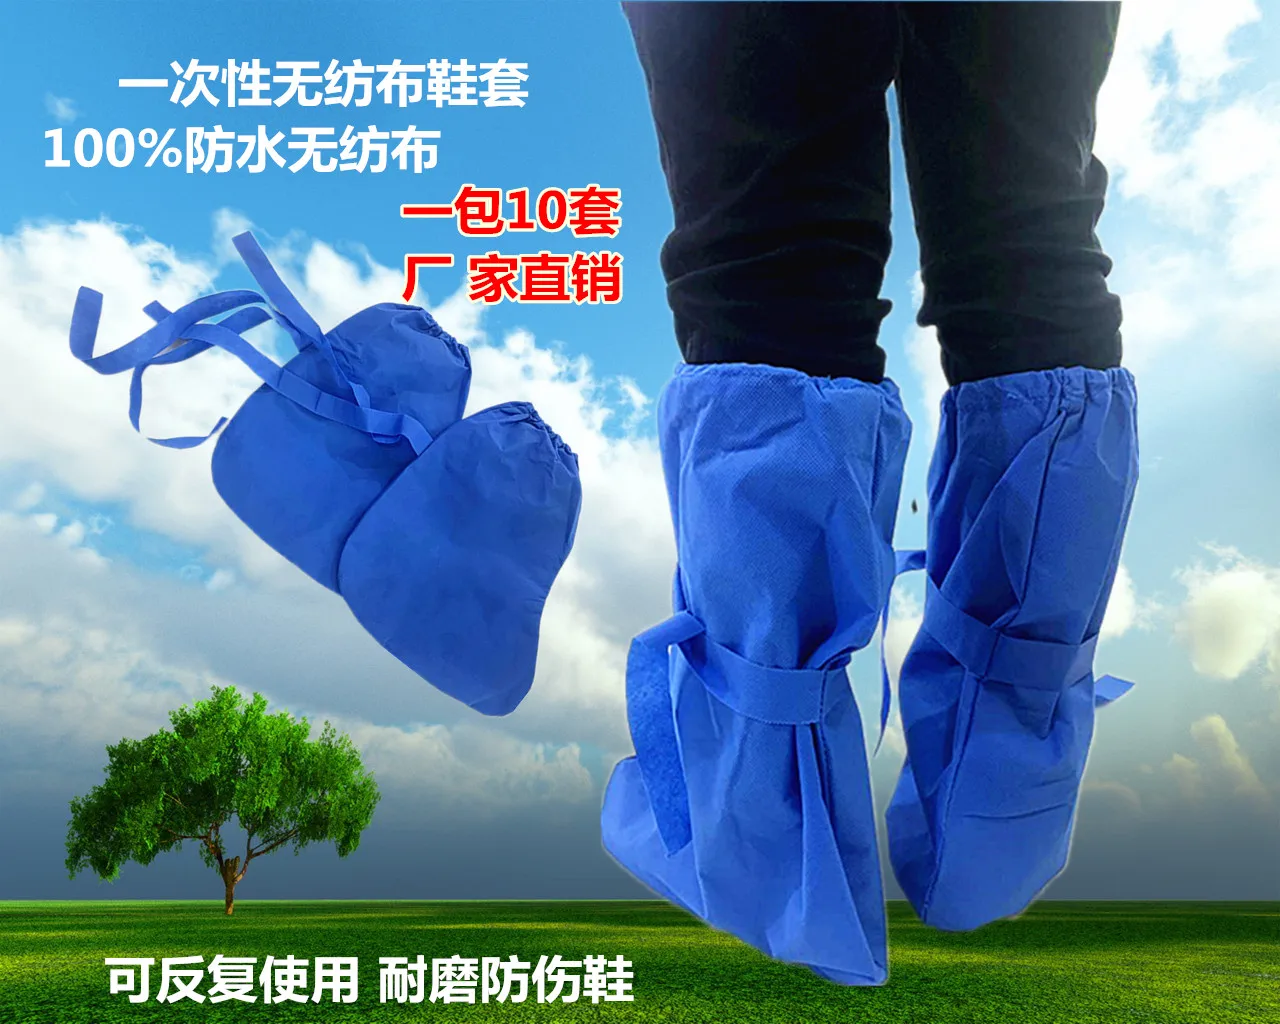 

Blue Disposable Non-Woven Breathable Non-Slip Overshoes Thicken Dustproof Elasticity Boot Shoe Covers for Indoor,Household